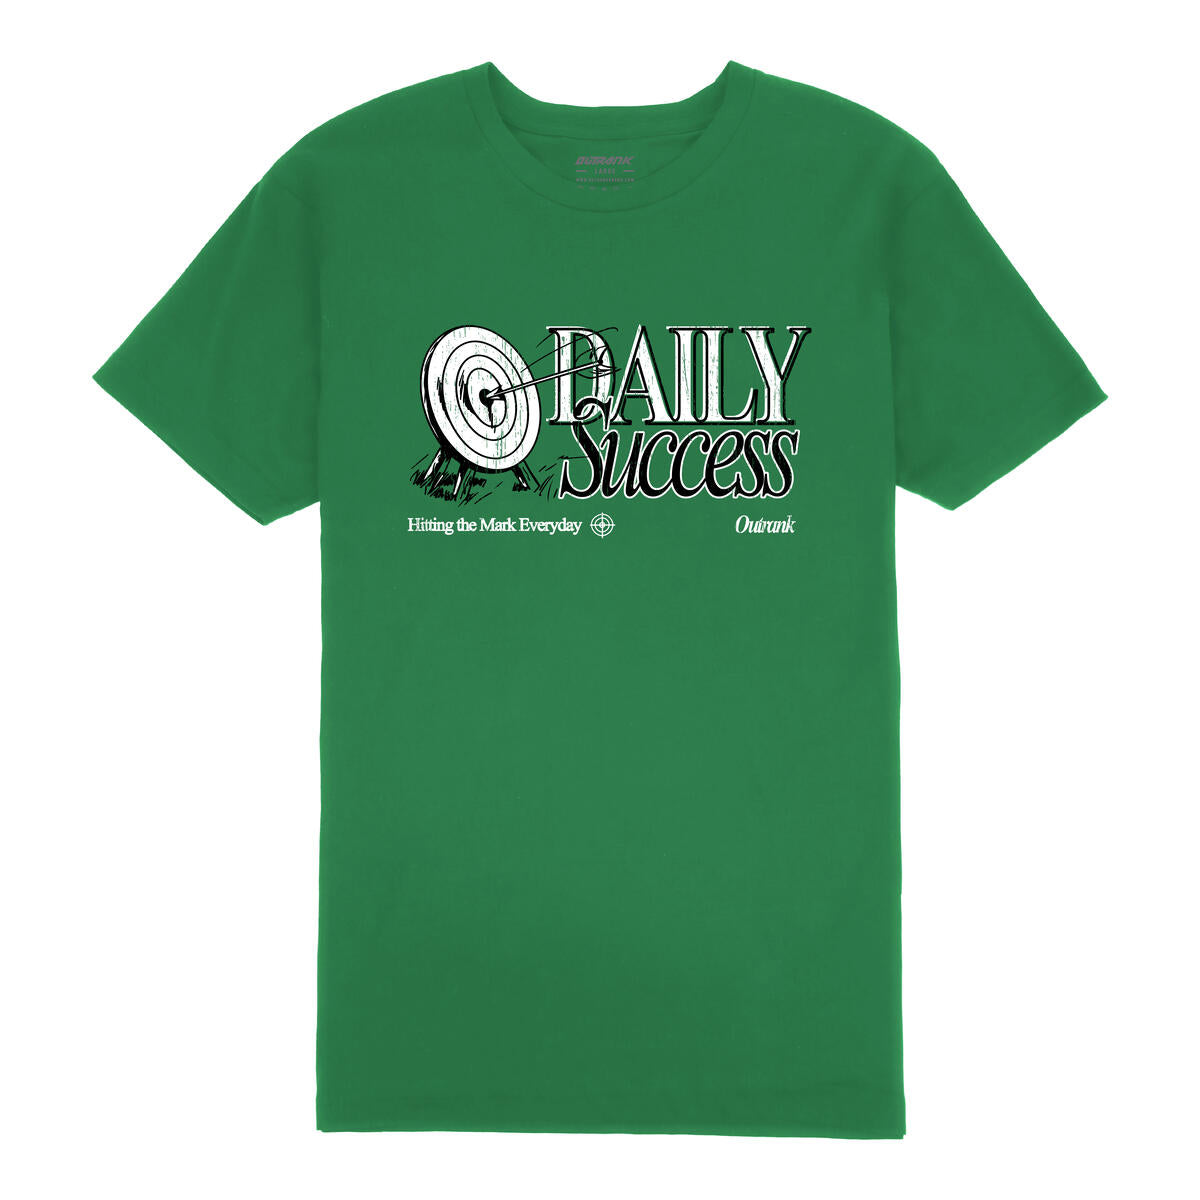 Outrank Daily Success T-shirt (Green)